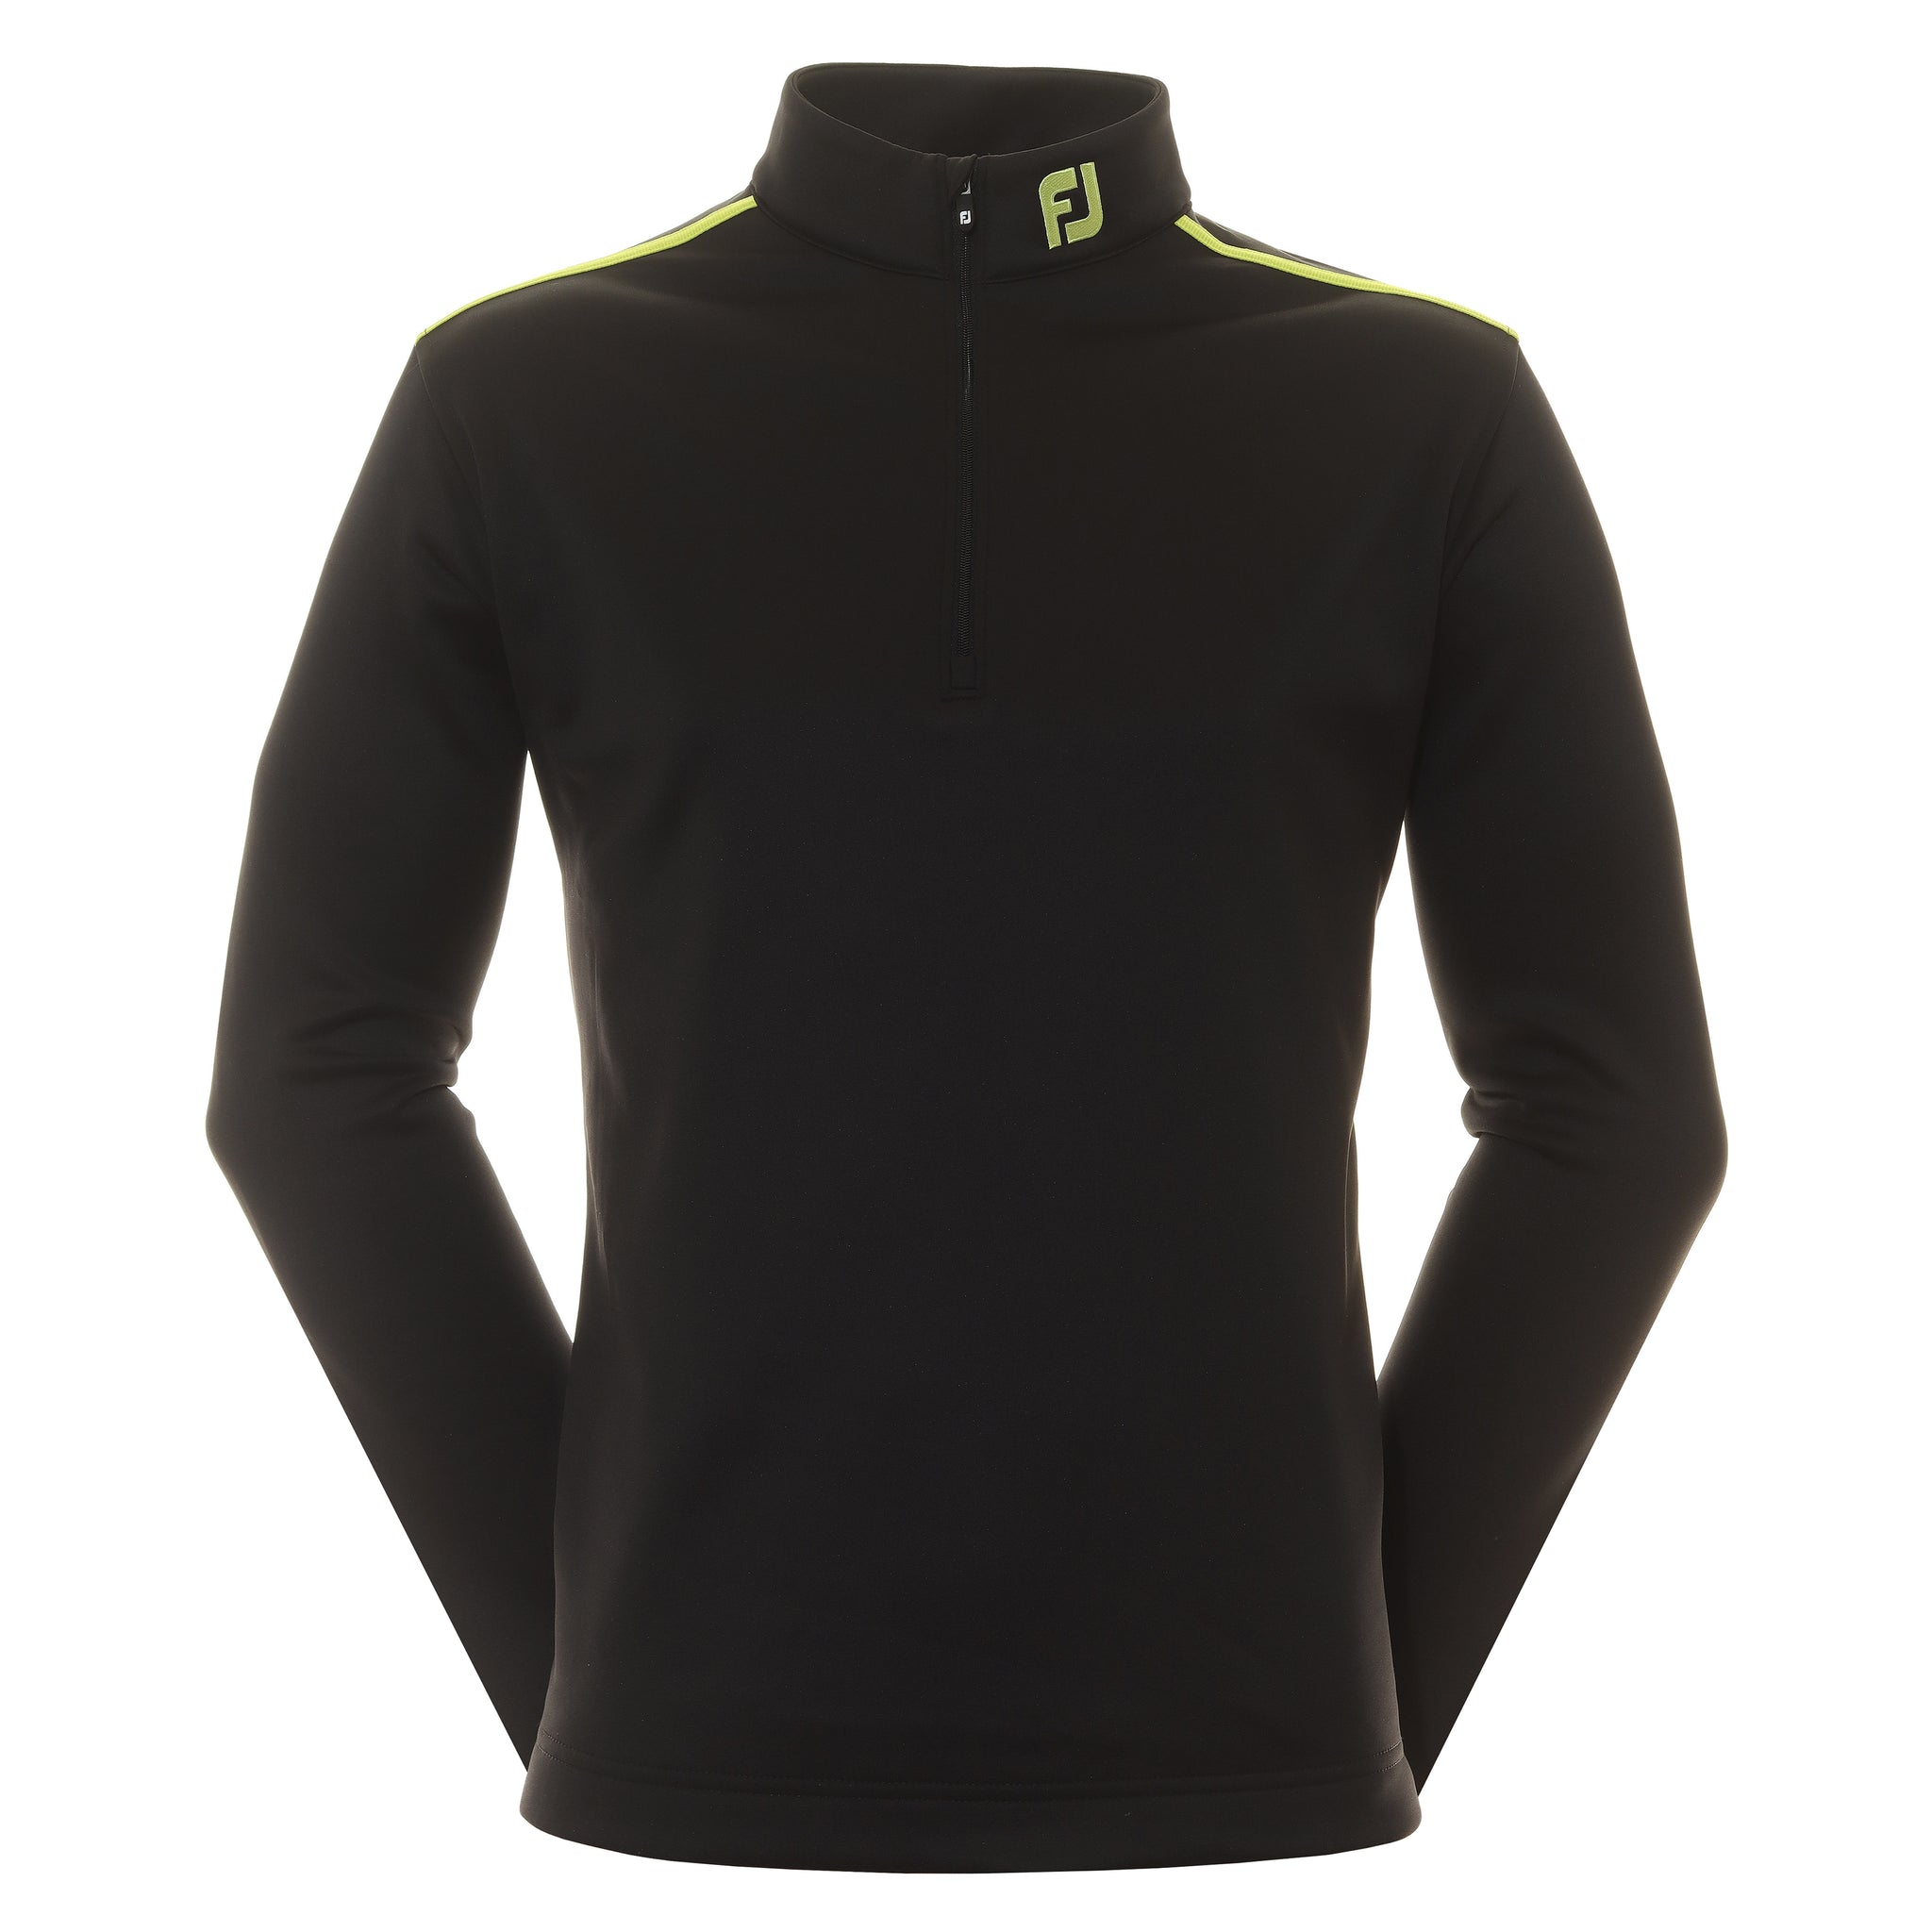 footjoy-jersey-solid-chill-out-pullover-89914-black-acid-green